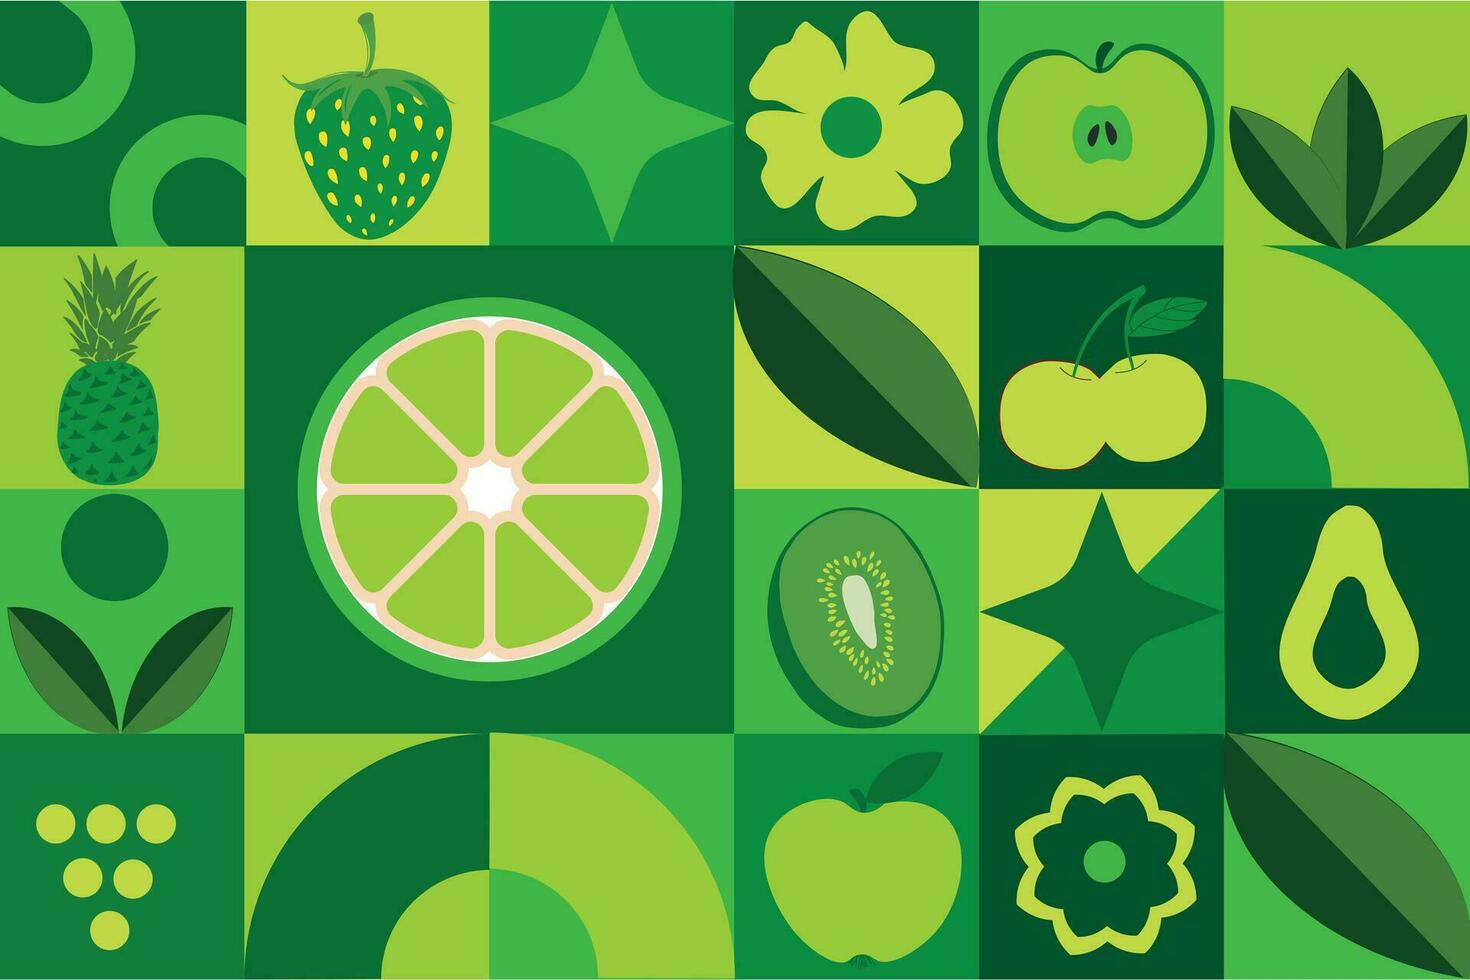 Geometric organic seamless pattern with fruits. Geometric summer fresh fruit cut artwork poster with colorful simple shapes. Scandinavian style flat abstract vector pattern design.